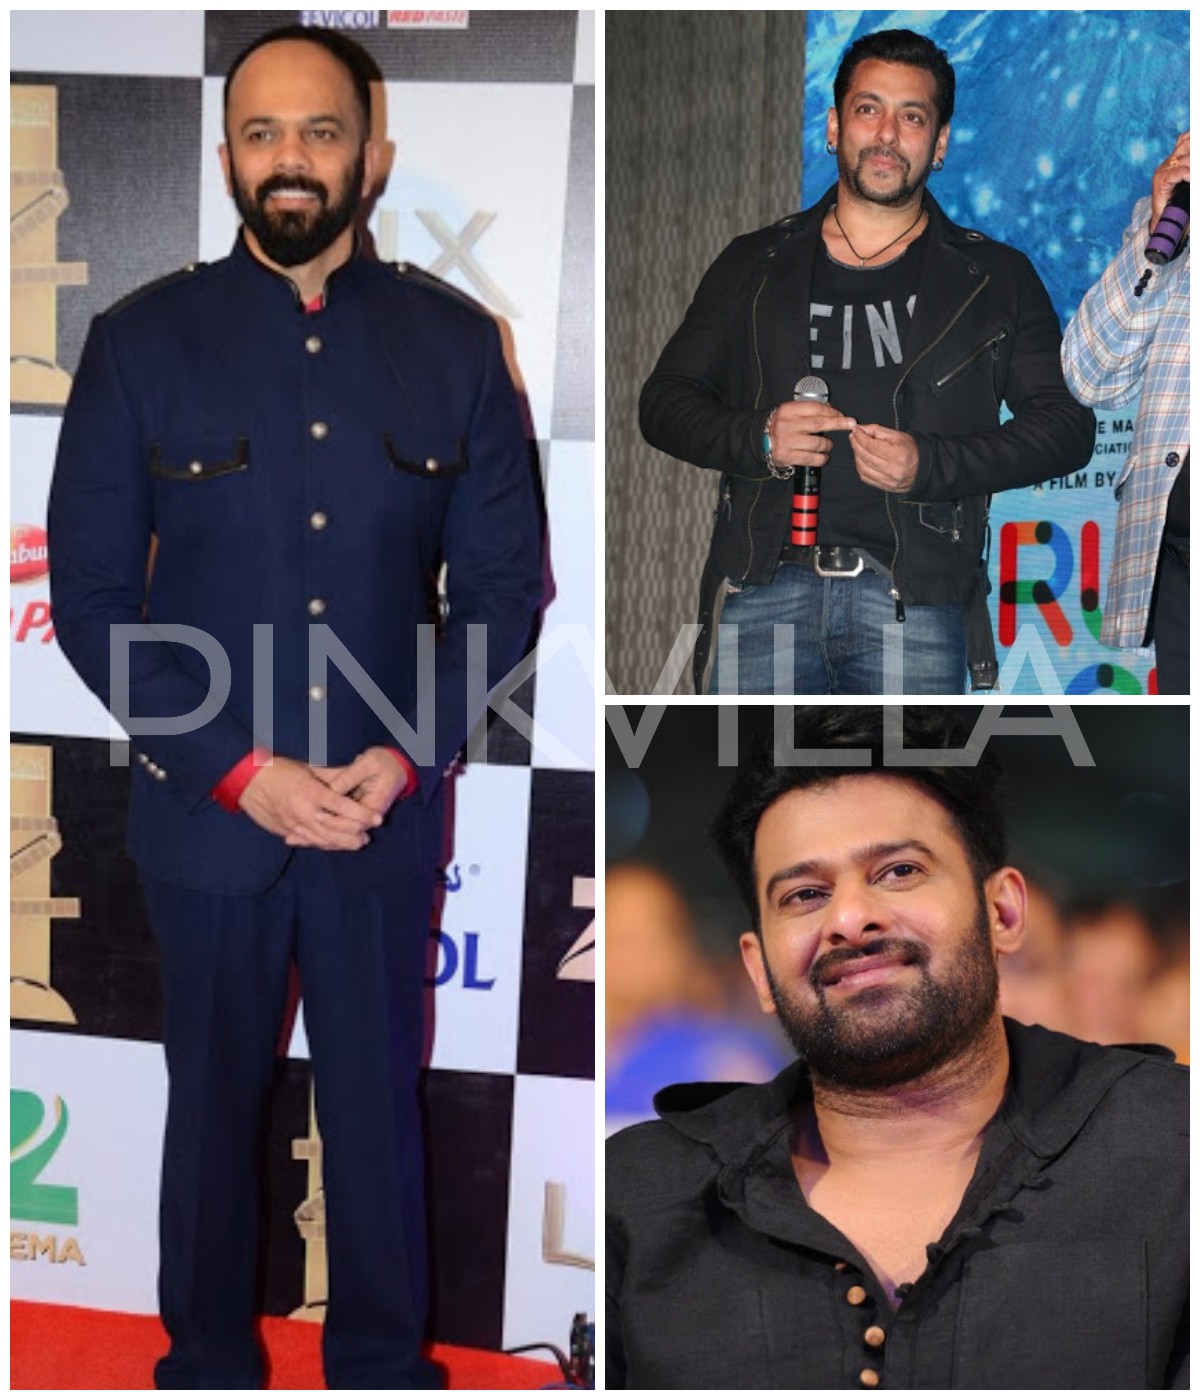 EXCLUSIVE - Rohit Shetty on his film with Salman Khan-Prabhas: I don't know from where this rumour started